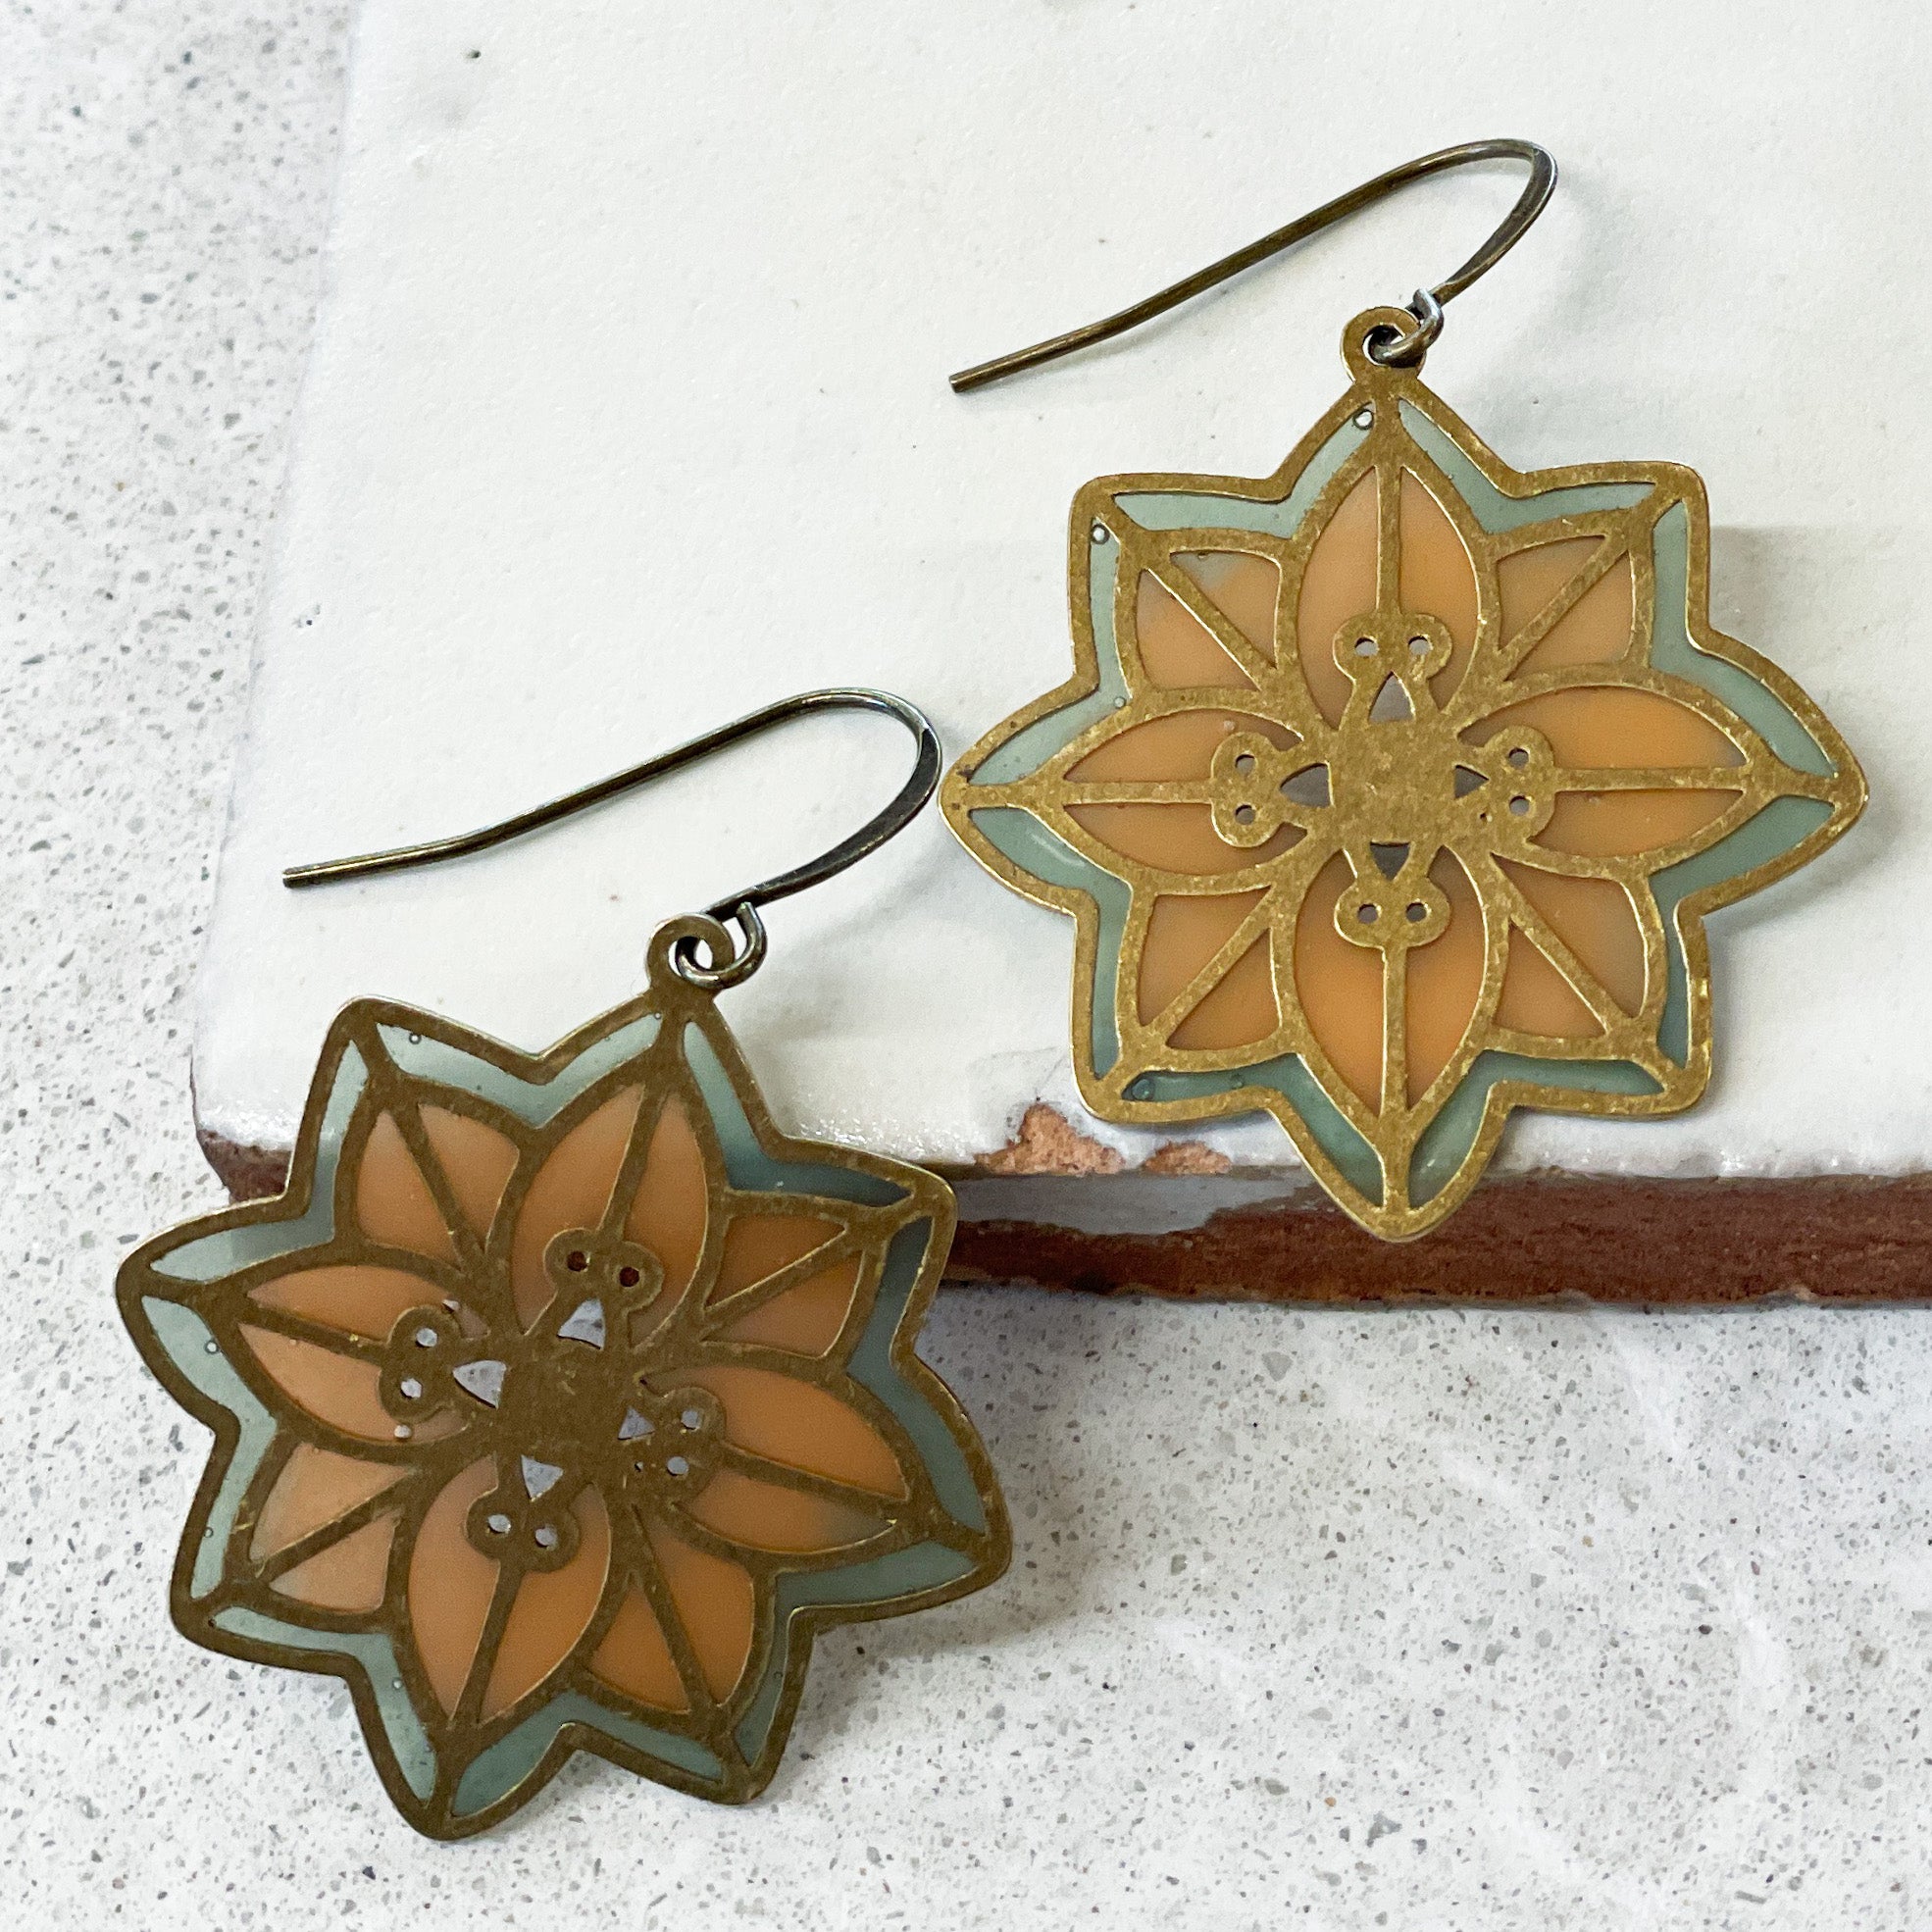 QUILTED STAR - stained glass resin earrings